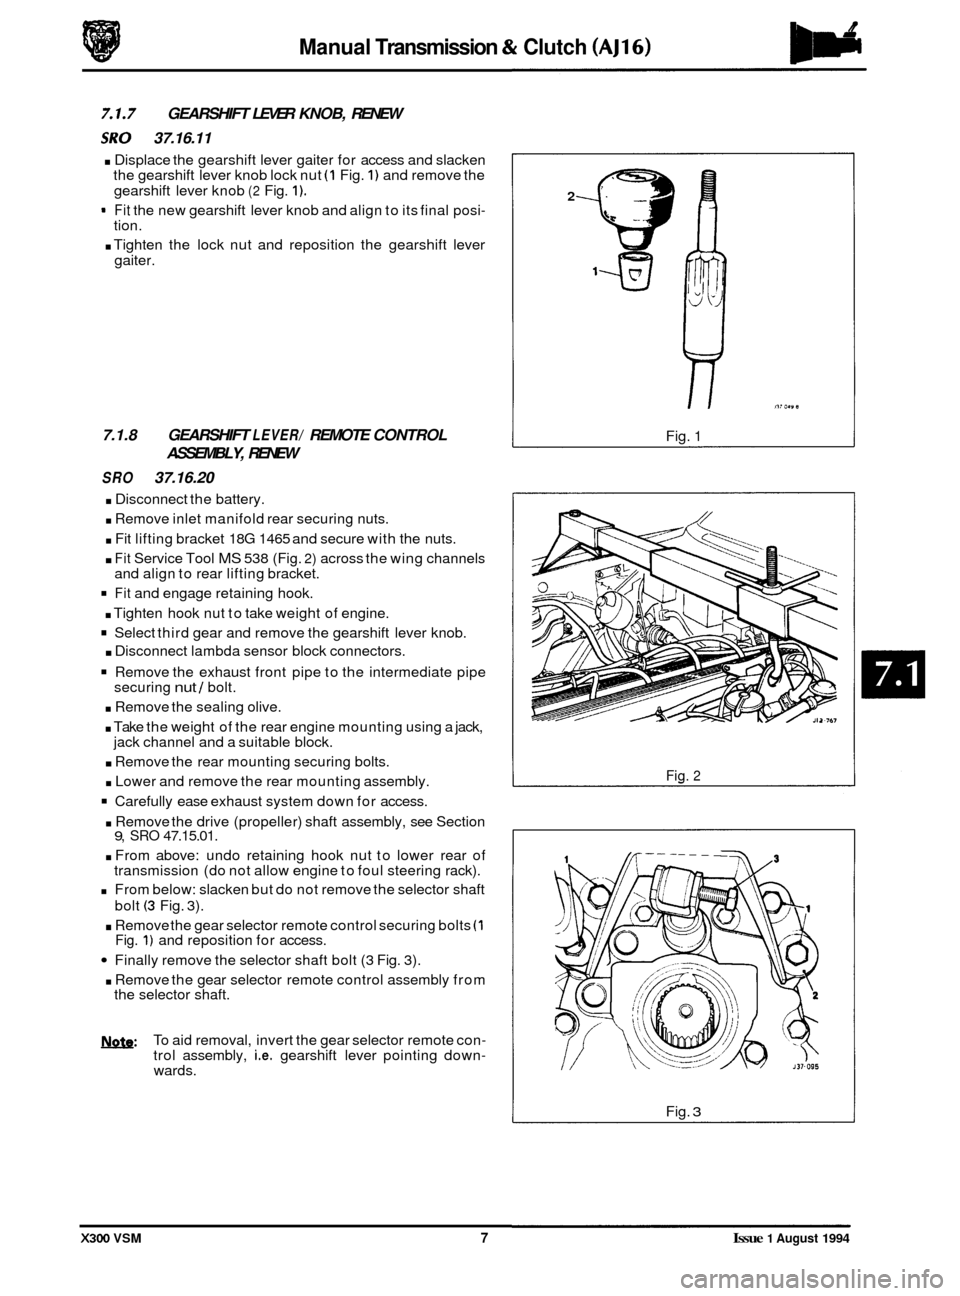 JAGUAR XJ6 1994 2.G Workshop Manual Manual Transmission & Clutch (AJ16) 
GEARSHIFT  LEVER KNOB,  RENEW 
:RY 37.16.11 
. Displace  the gearshift  lever gaiter for access  and slacken 
the  gearshift  lever  knob lock nut (1 Fig. 1) and r